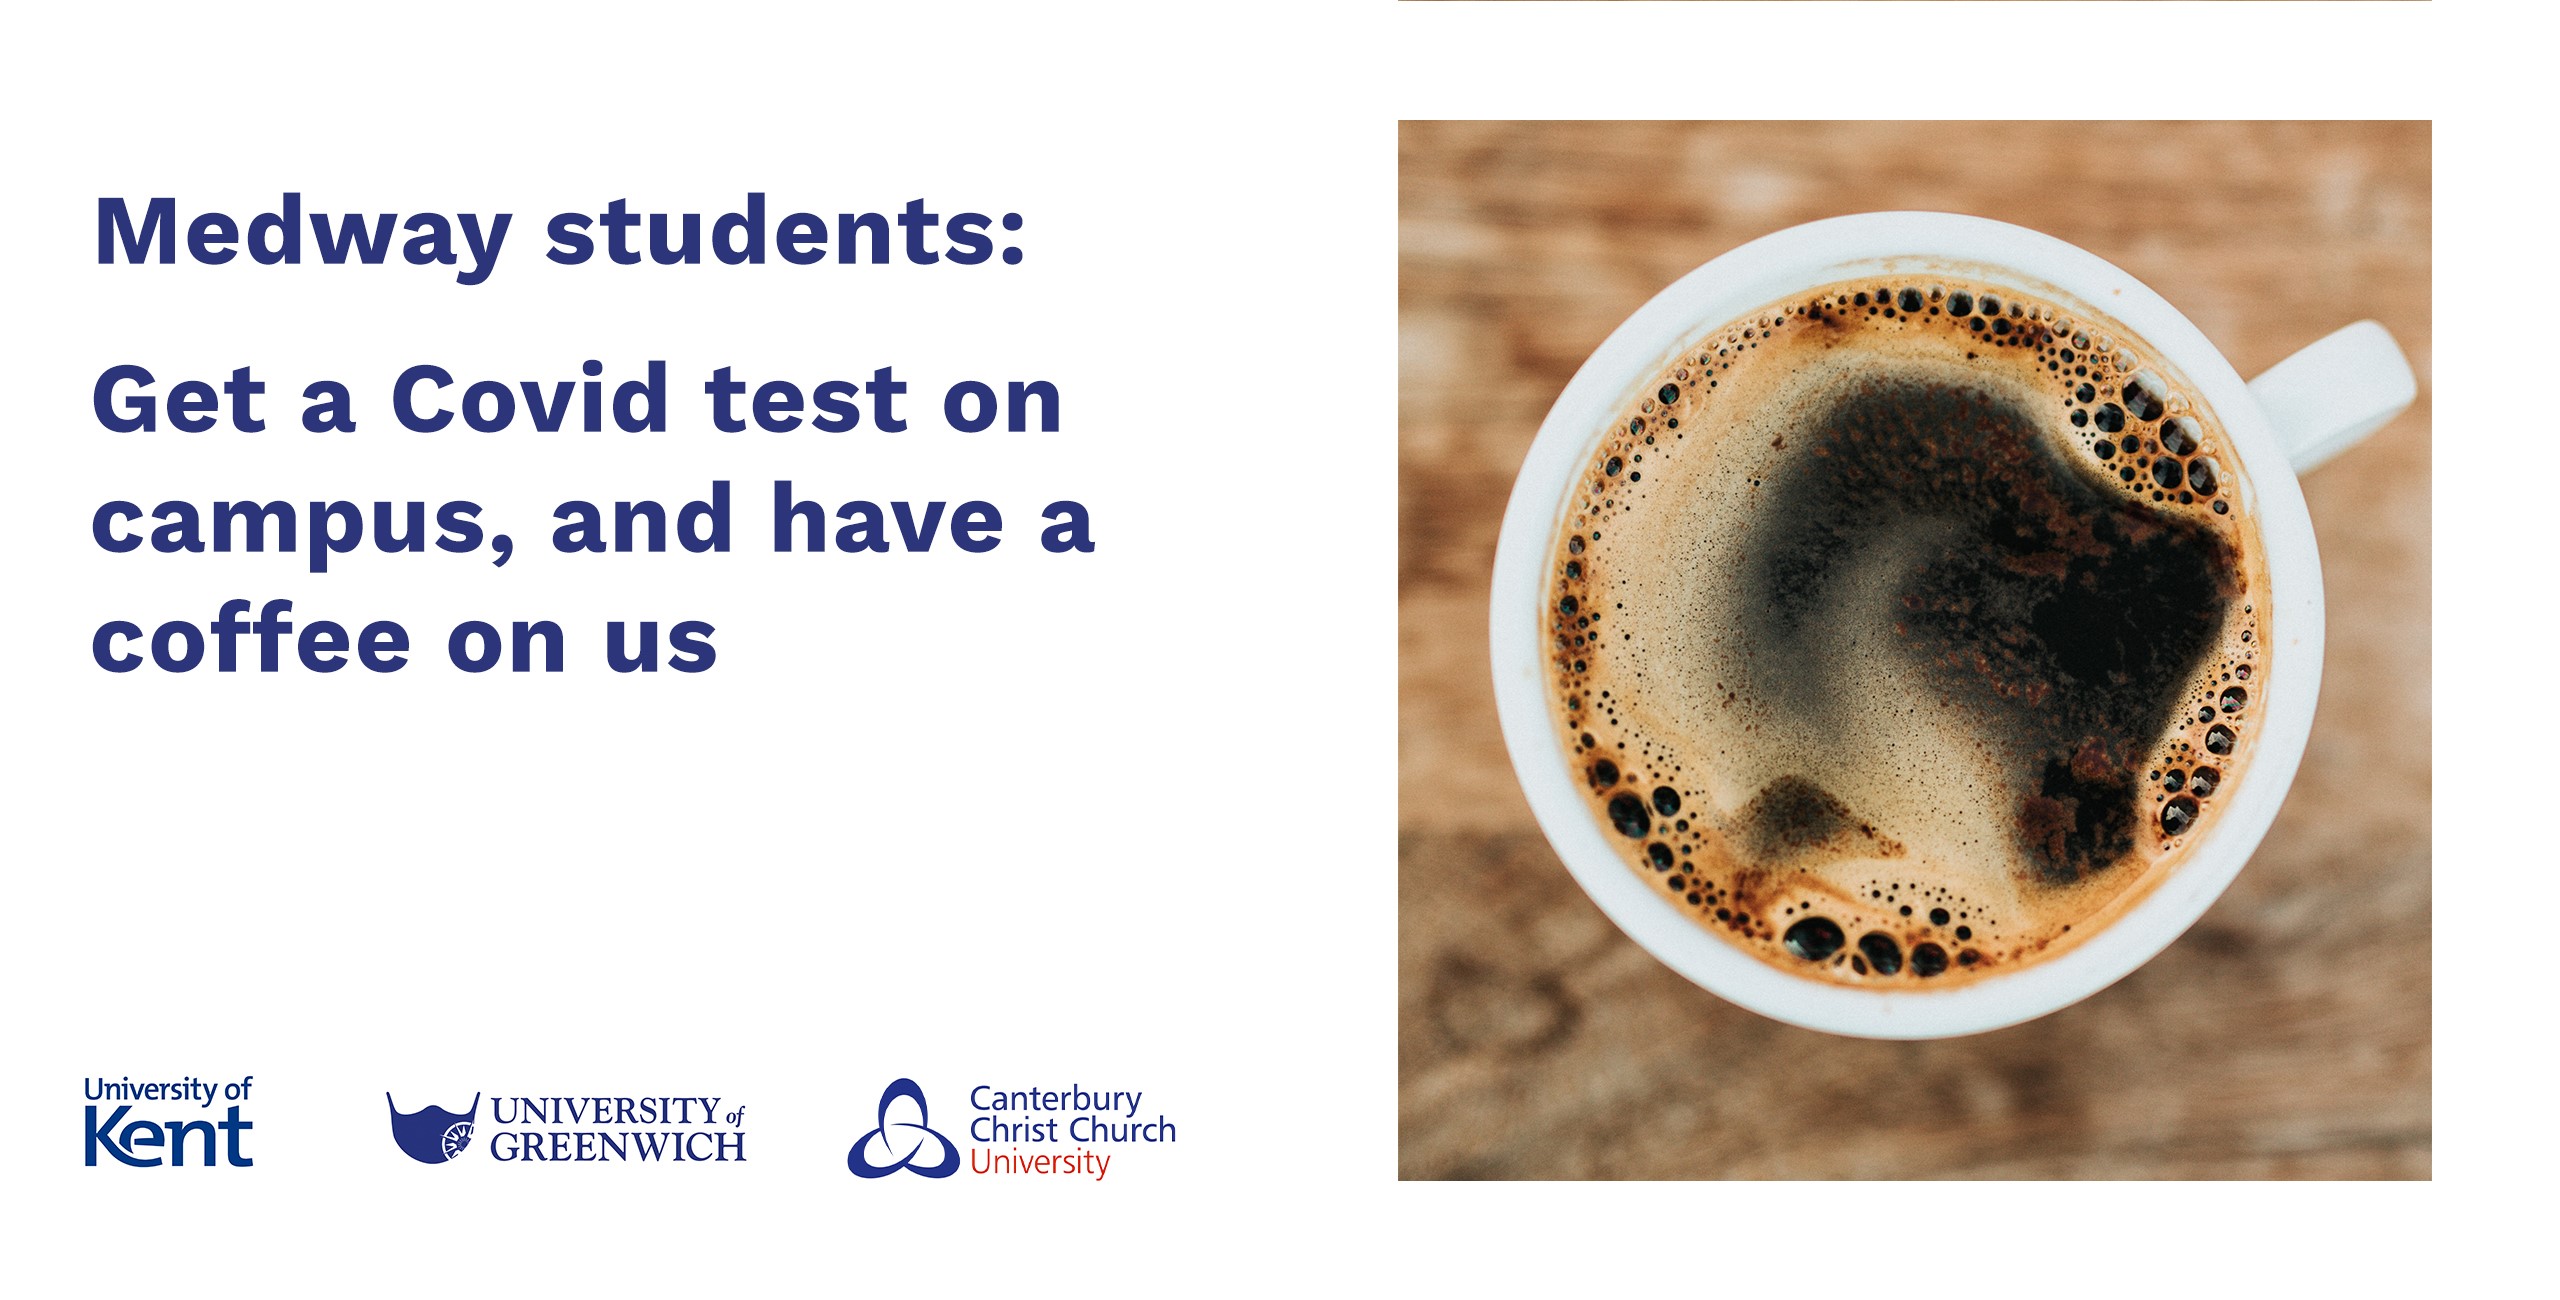 Image of coffee cup with text 'Medway students: Get a Covid test on campus and have a coffee on us'